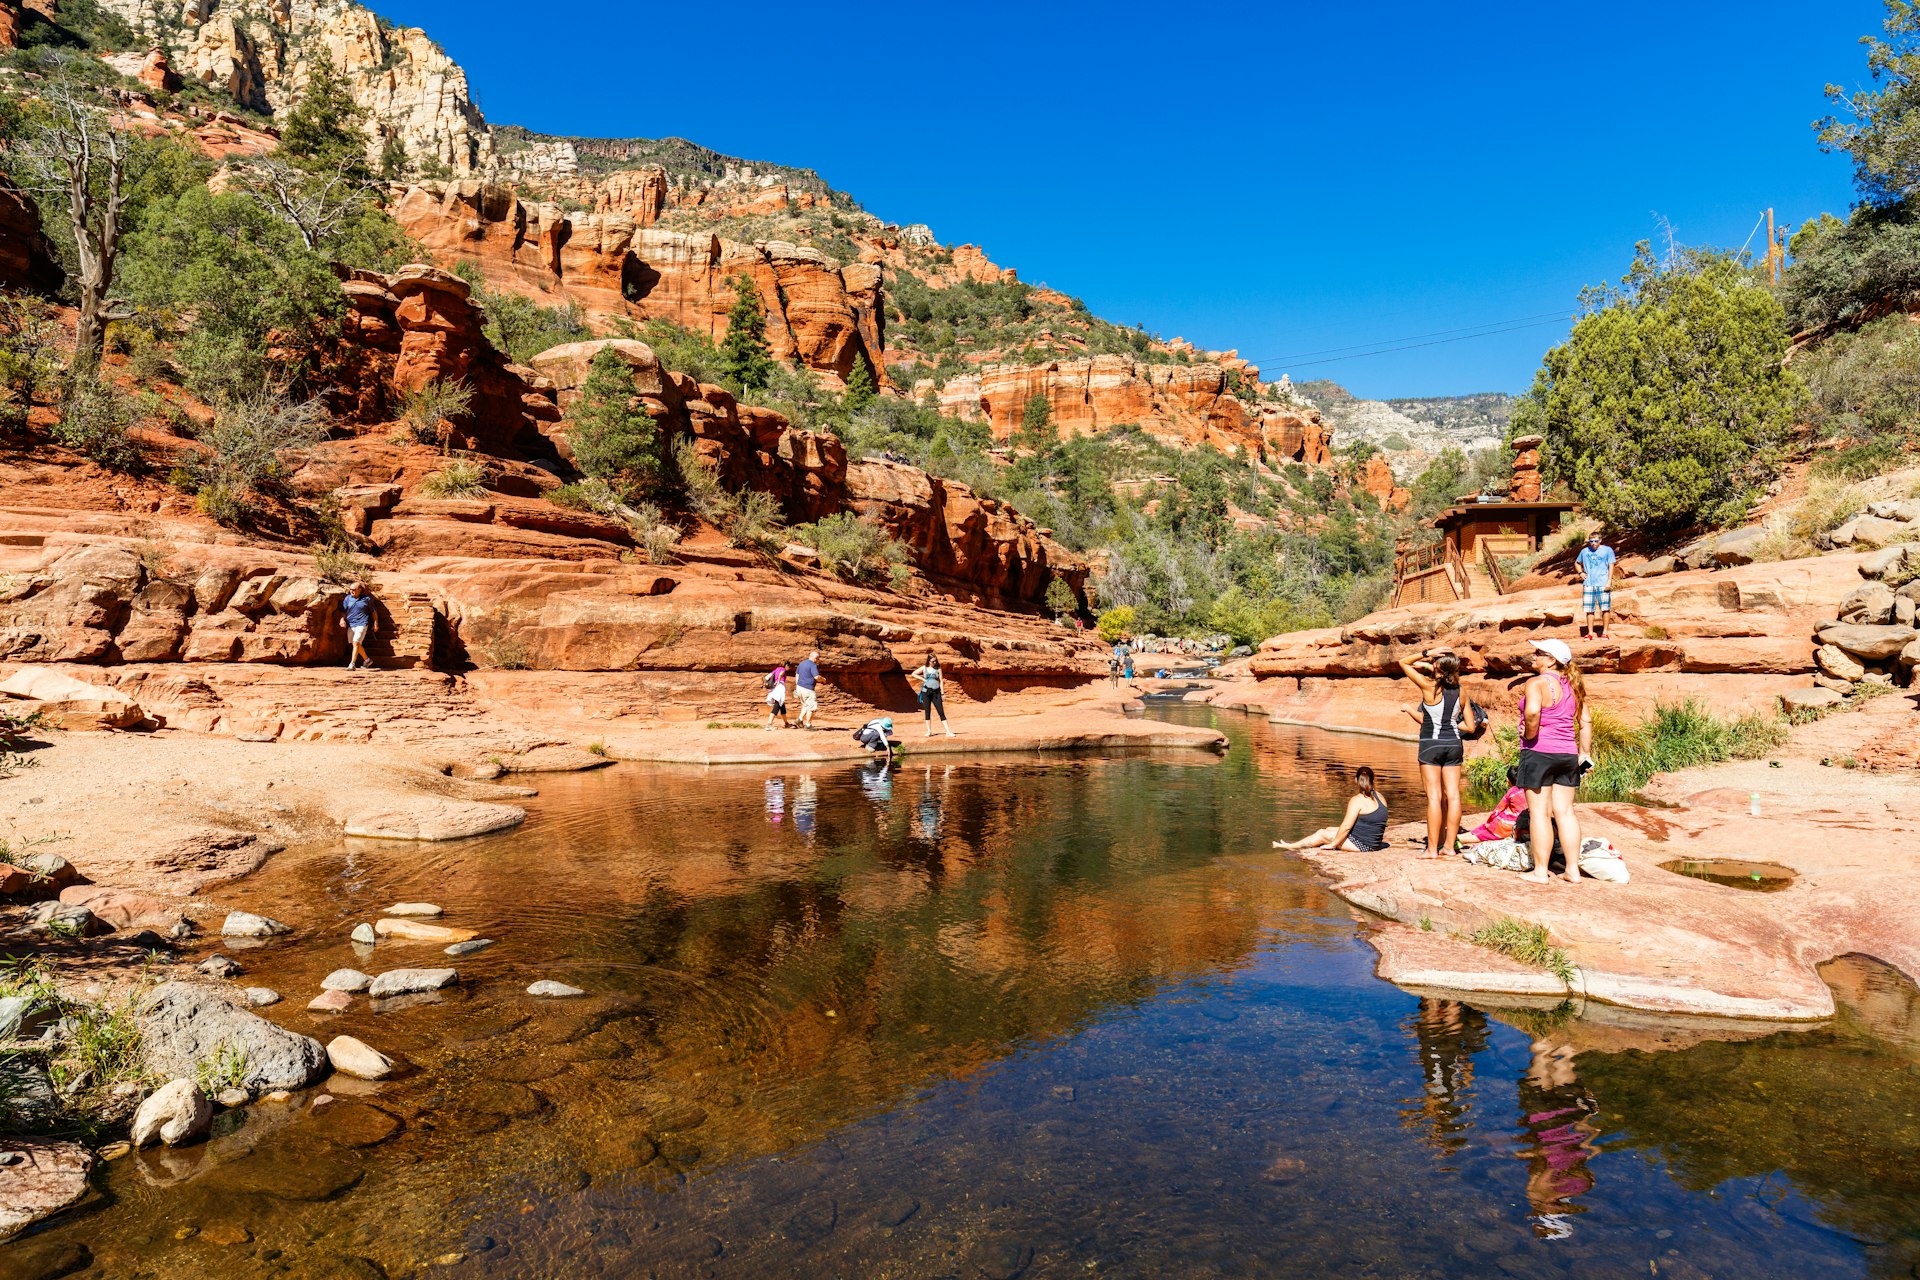 Several groups of people in outdoor clothing linger around a creek at the bottom of a canyon of tall red rocks